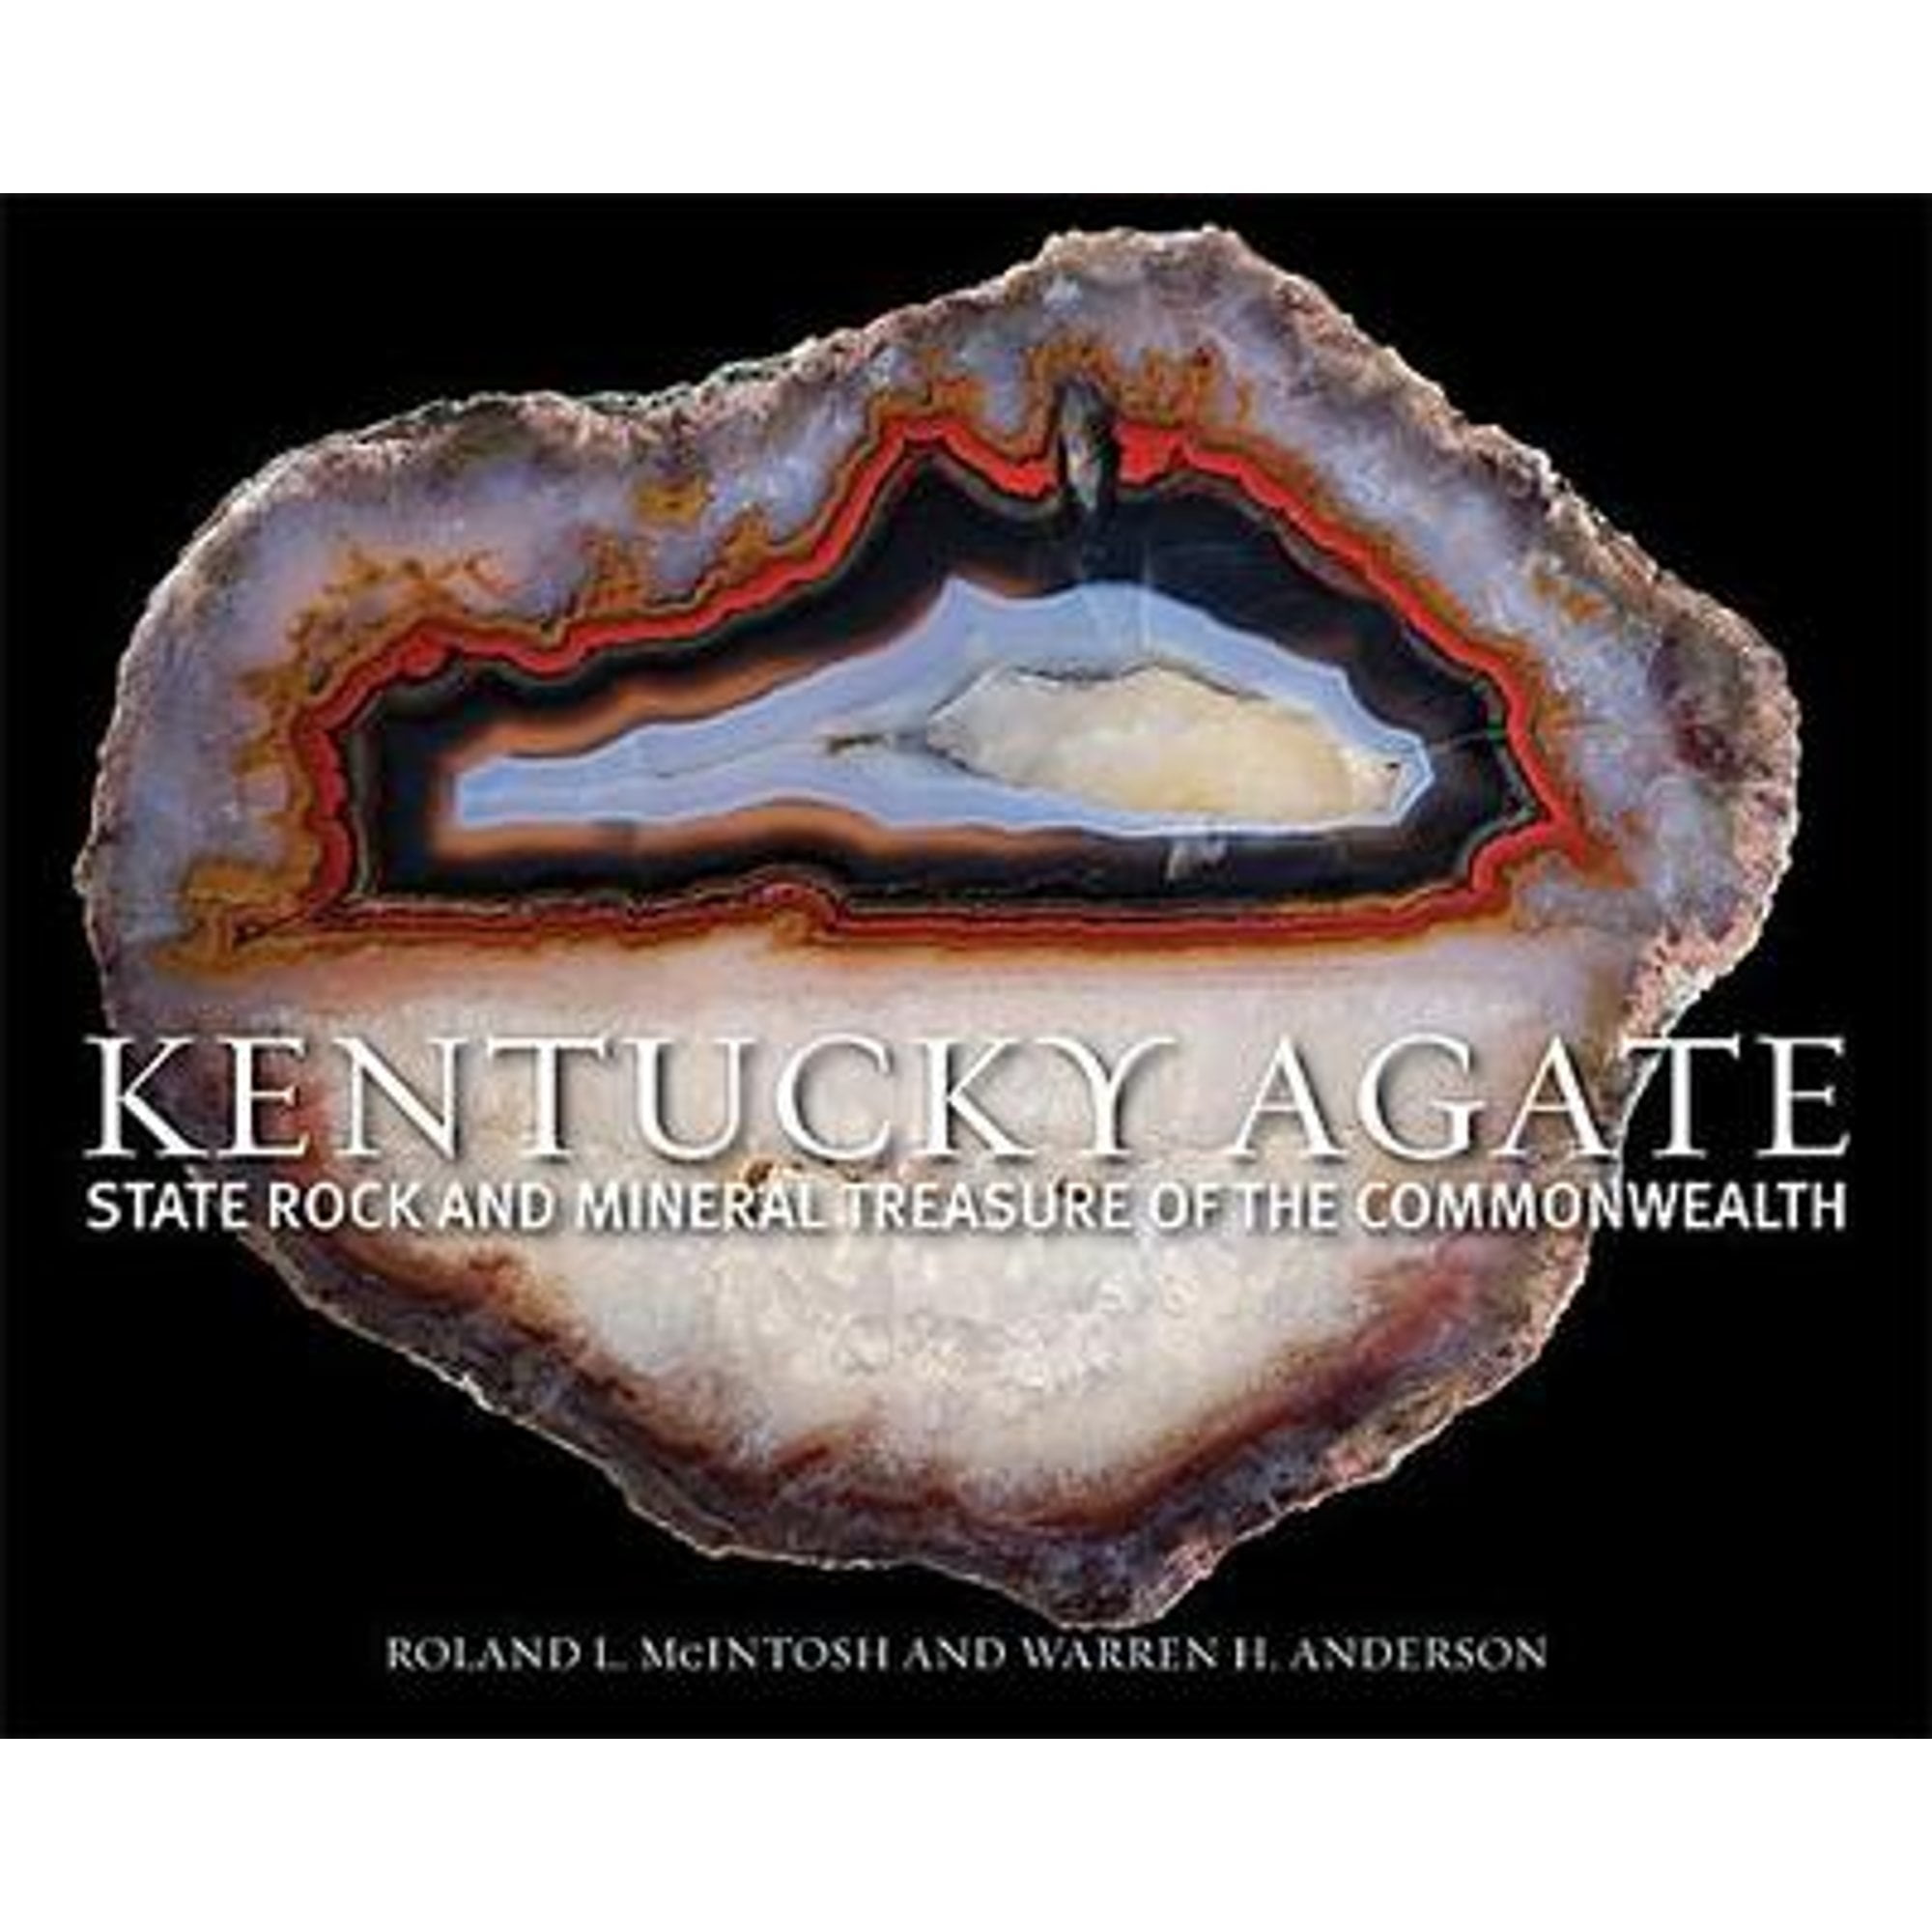 Pre-Owned Kentucky Agate: State Rock and Mineral Treasure of the Commonwealth (Hardcover 9780813142456) by Roland L McIntosh, Warren H Anderson